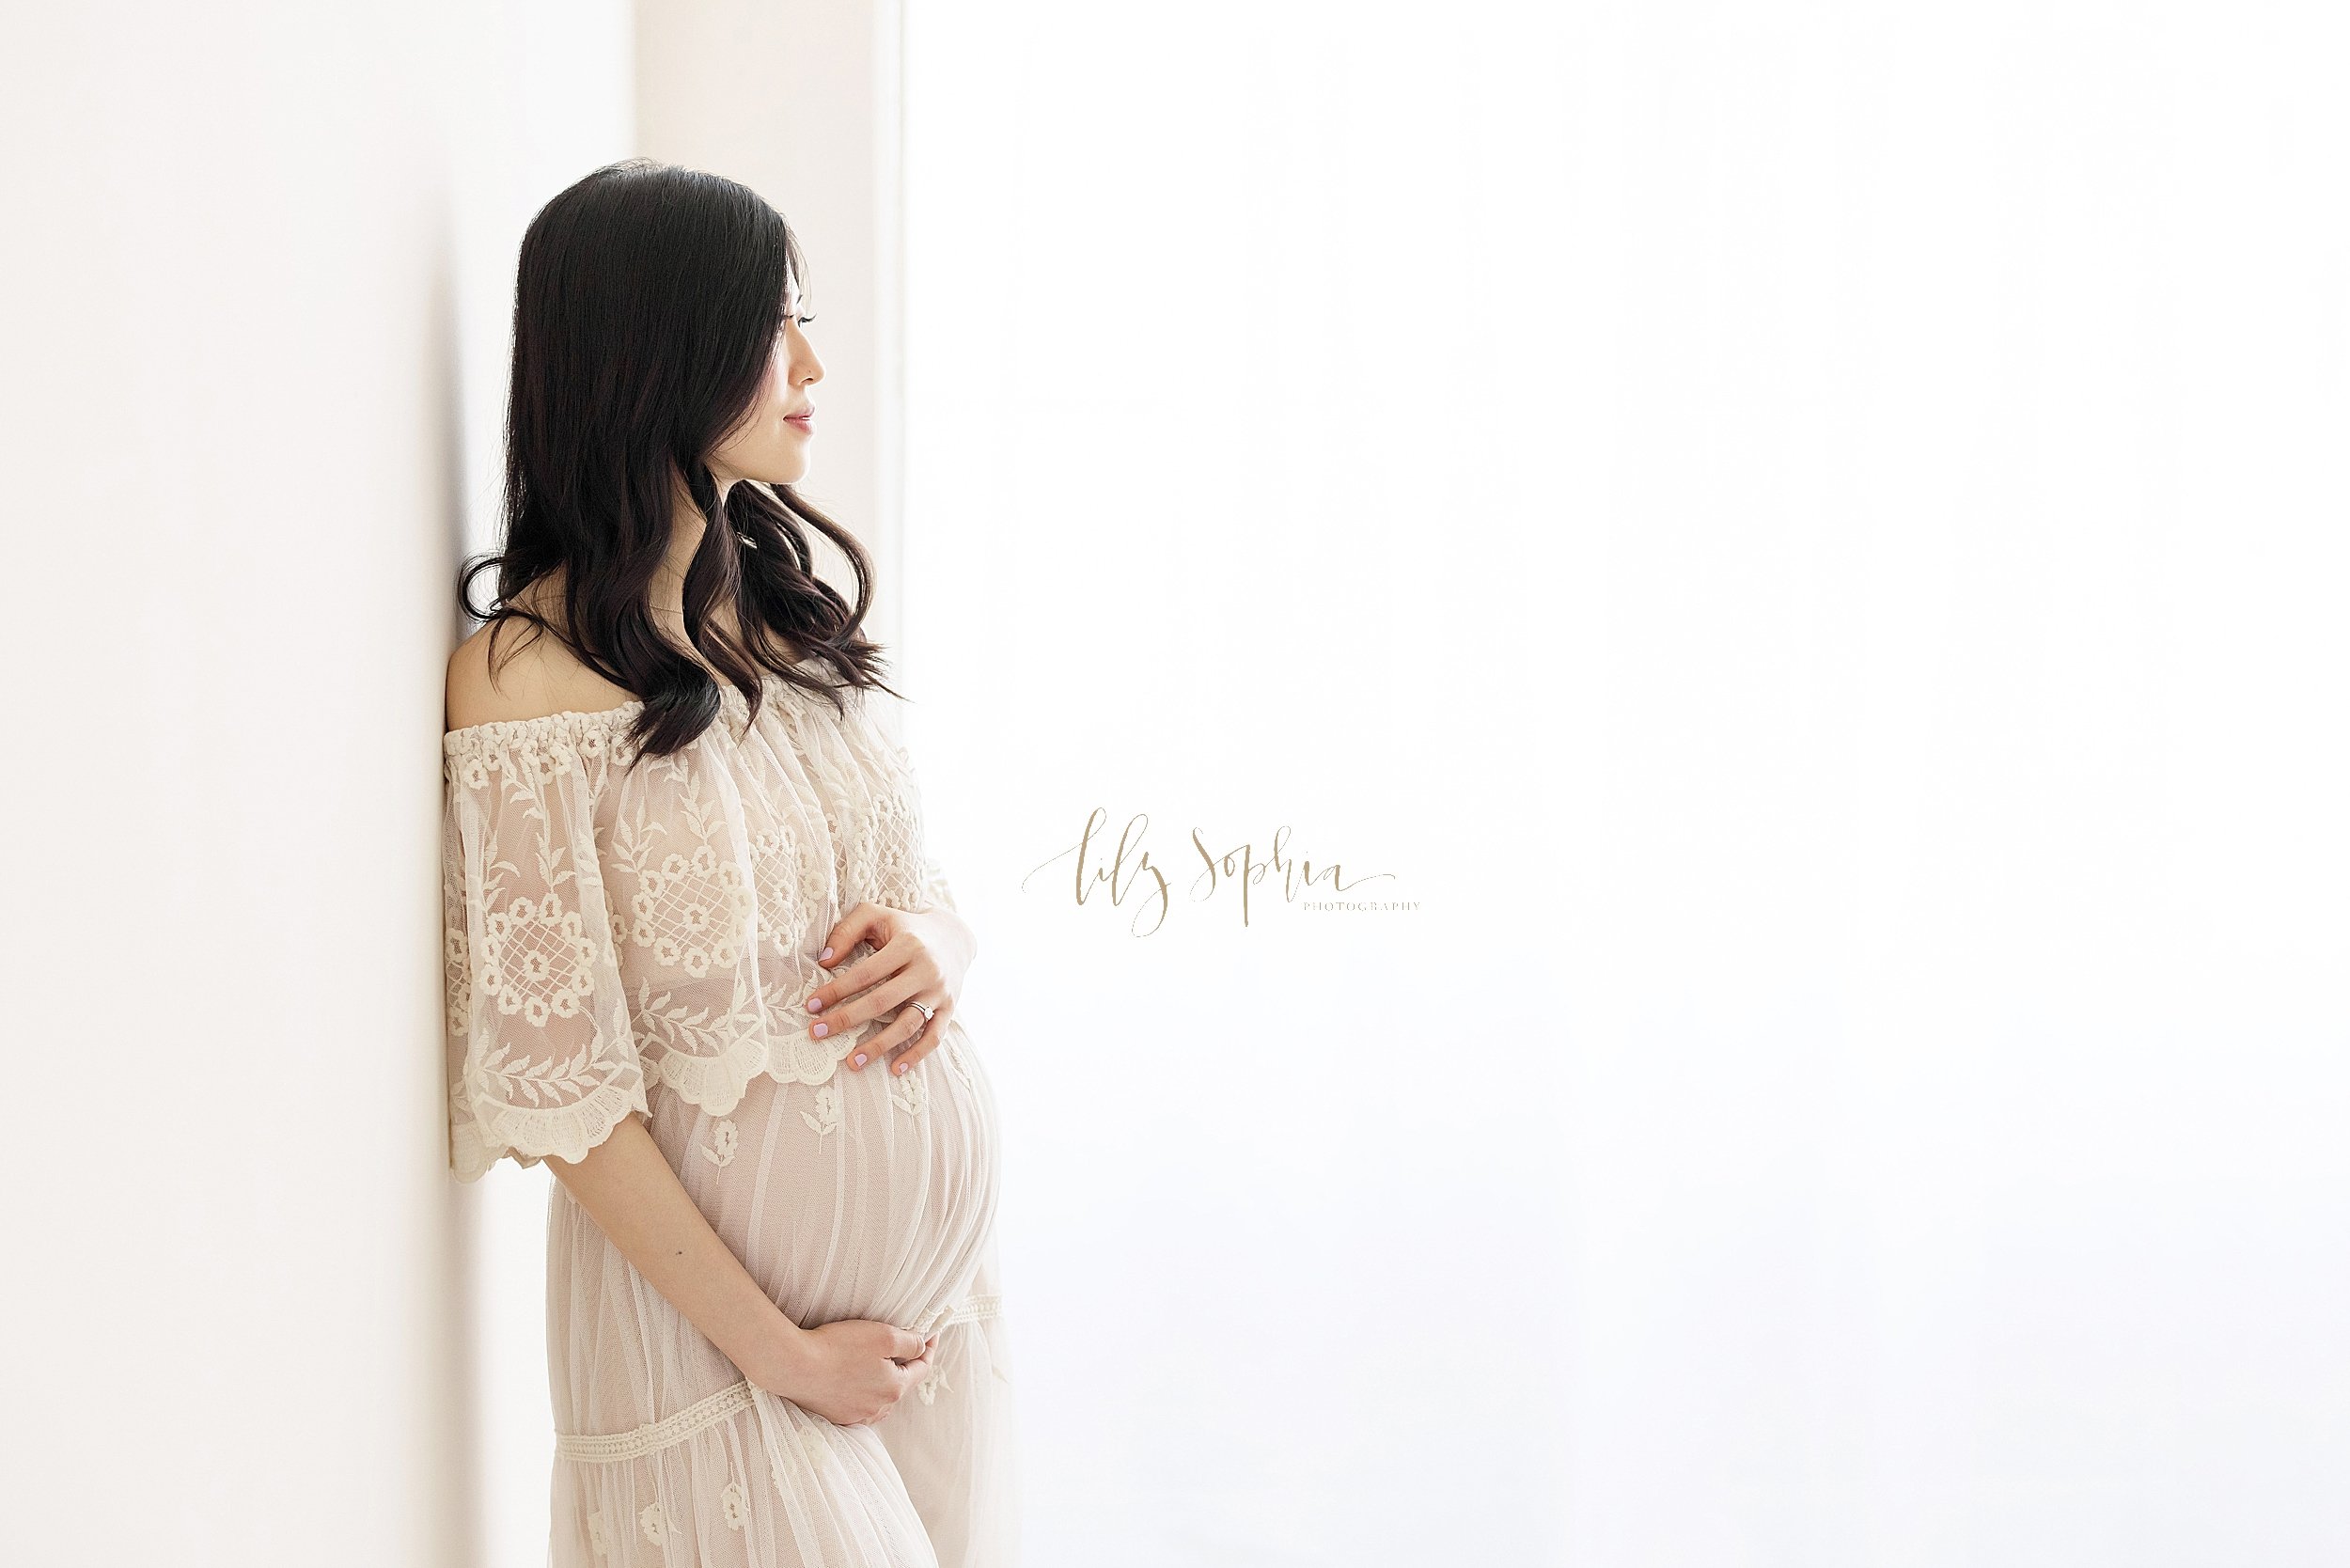  Maternity photograph of an Asian woman with her right shoulder against a wall as she wears a full-length flowing off-the-shoulder gown with a large lace ruffle bodice with her hands framing her belly as she contemplates the birth of her child while 